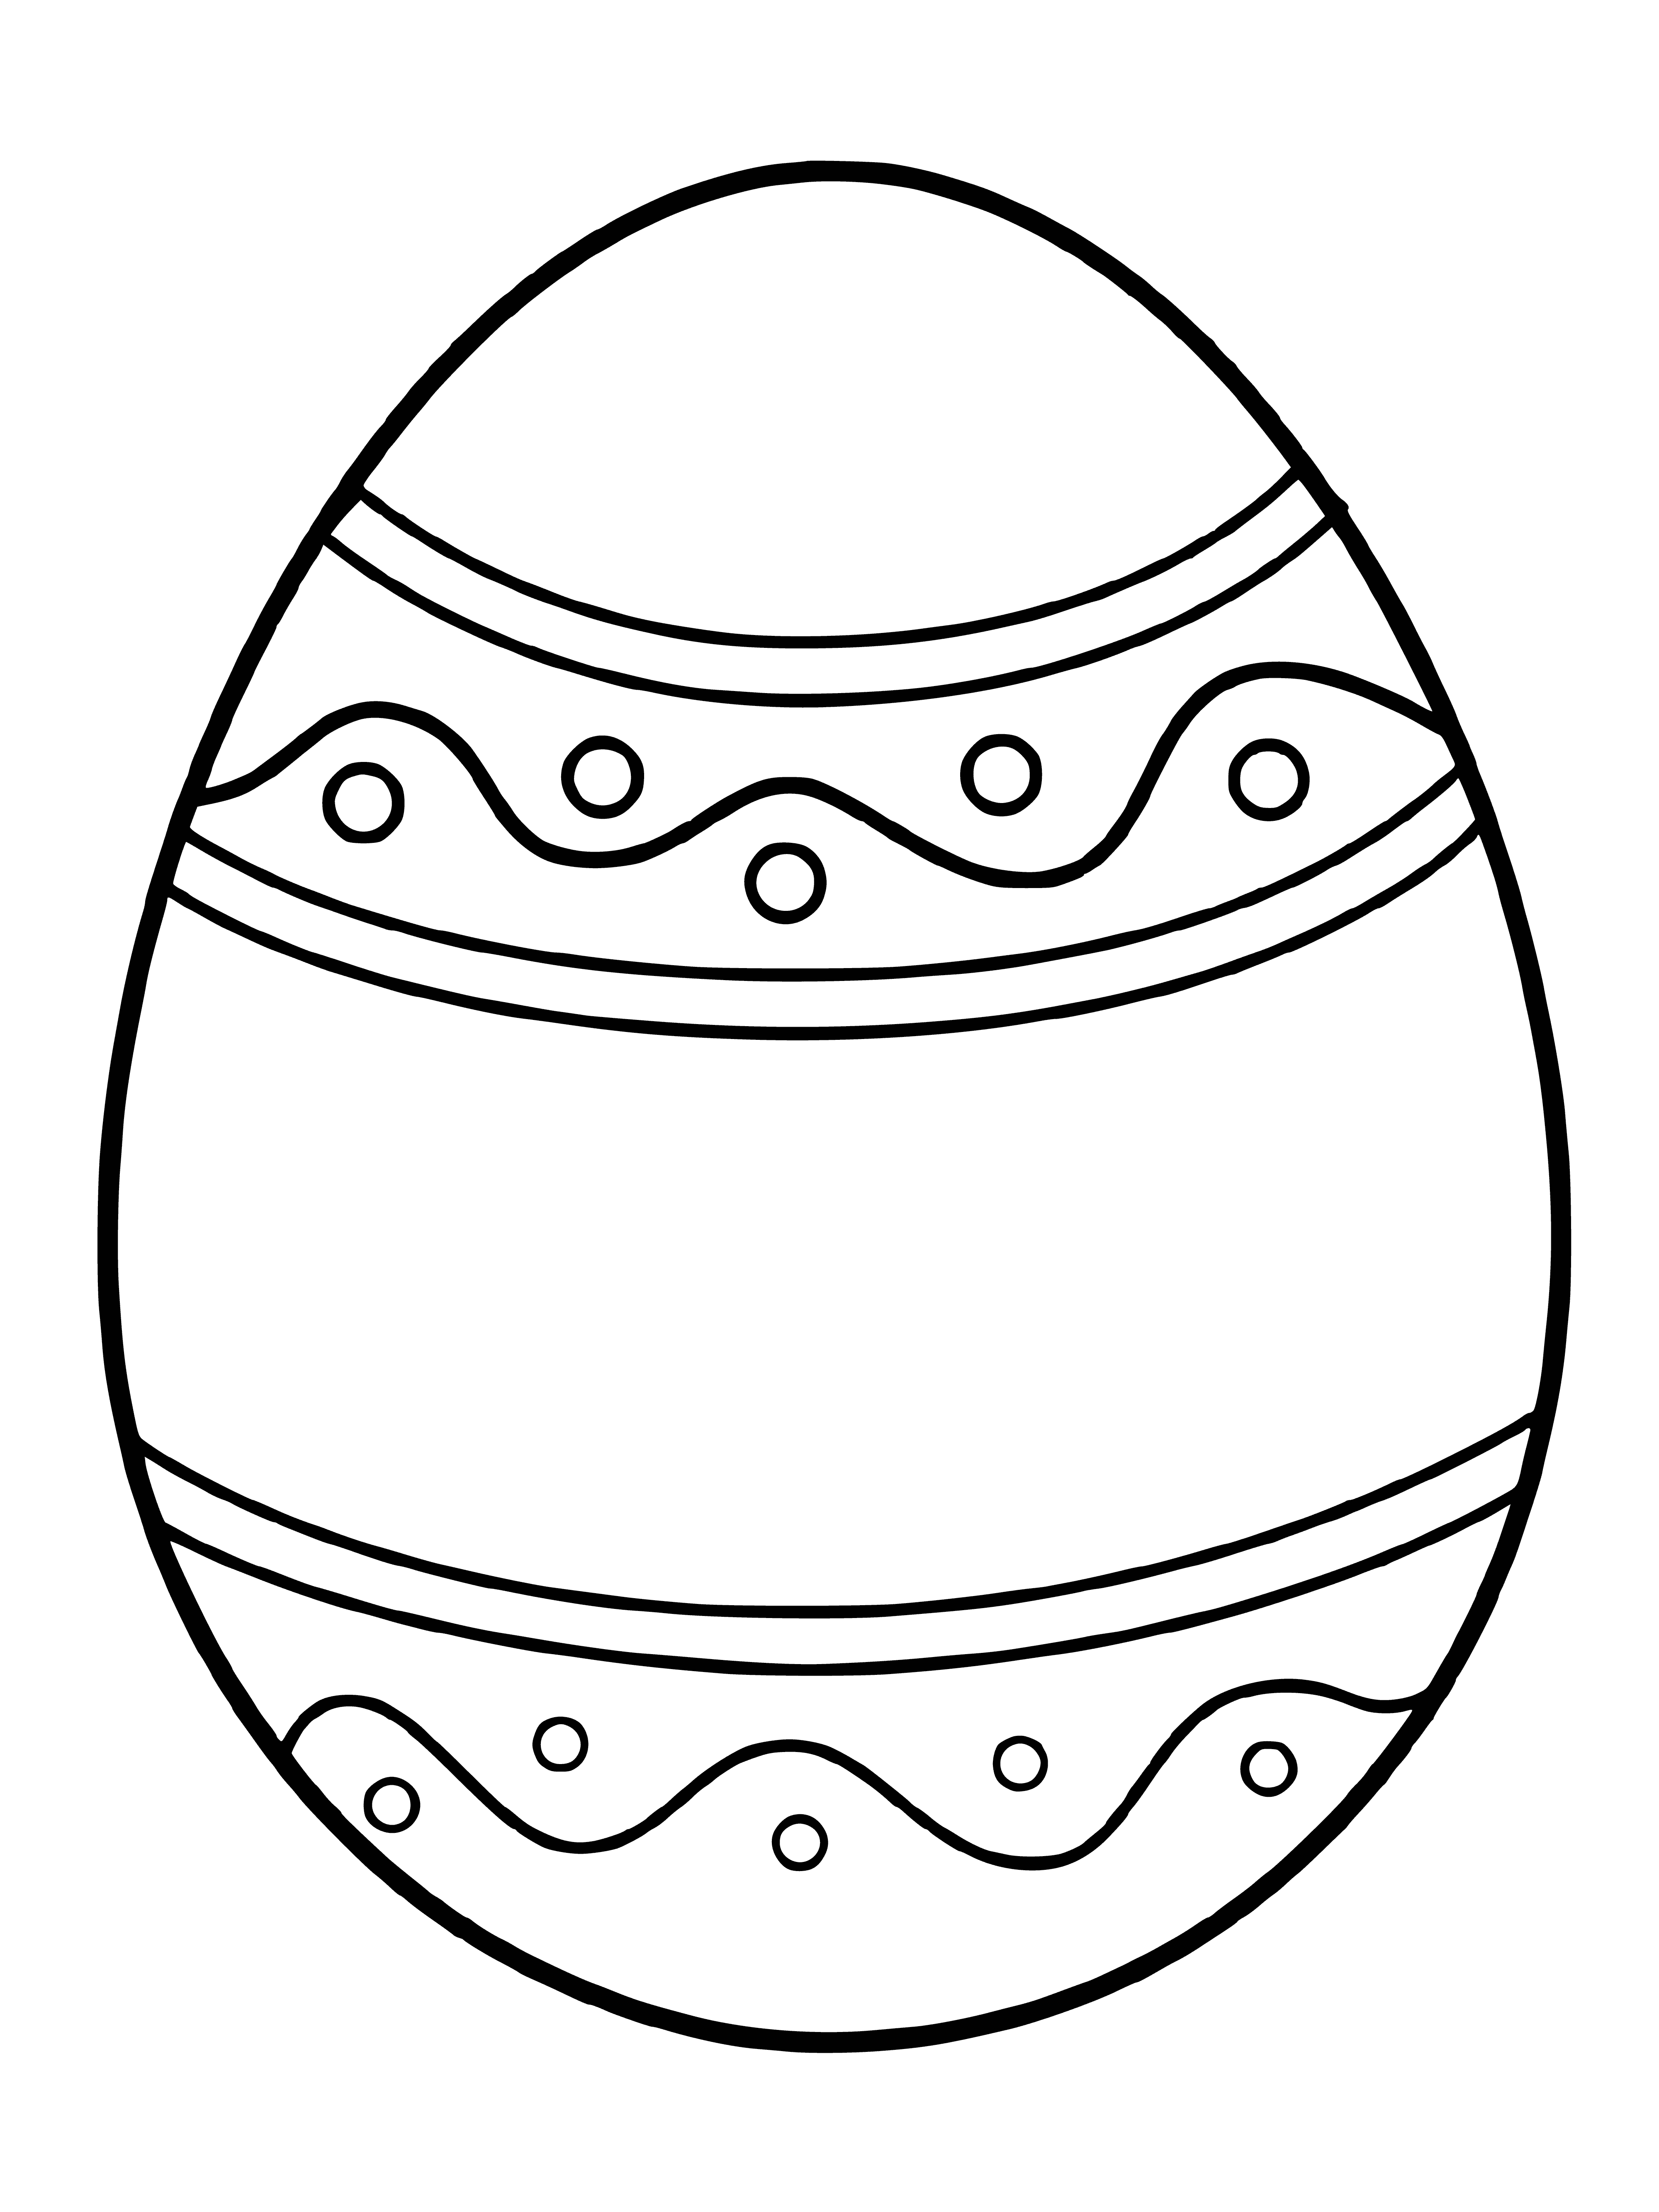 coloring page: Pretty eggs in a basket; decorated with bunnies, chicks, flowers, stripes & polka dots!